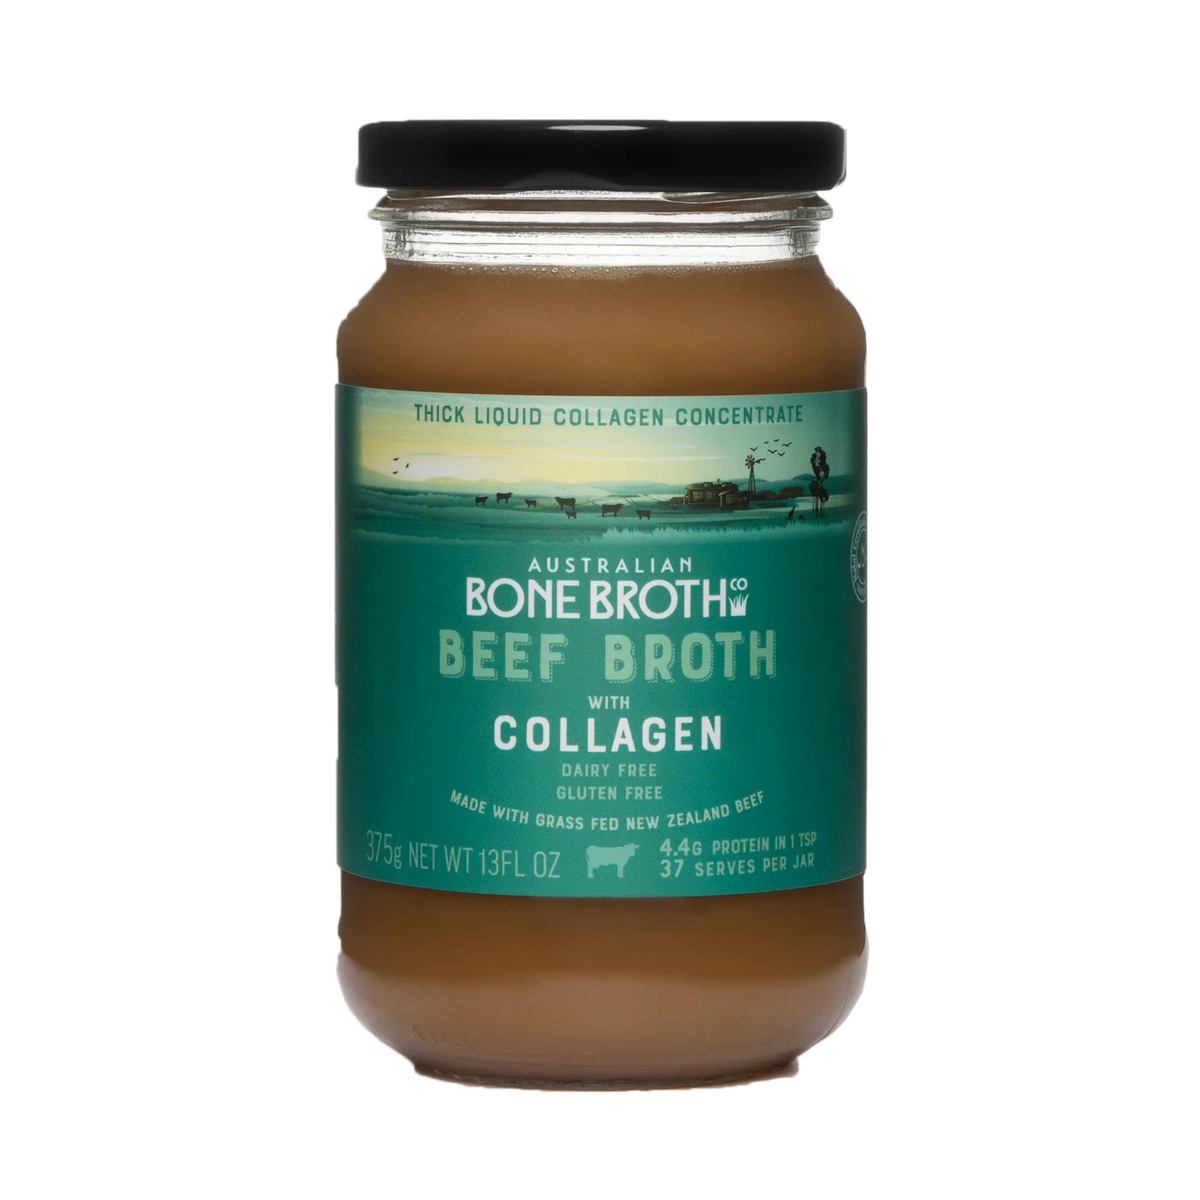 All-Natural Grass-Fed Beef Bone Broth Concentrate with Collagen (375g/37 Servings) - Horizon Farms